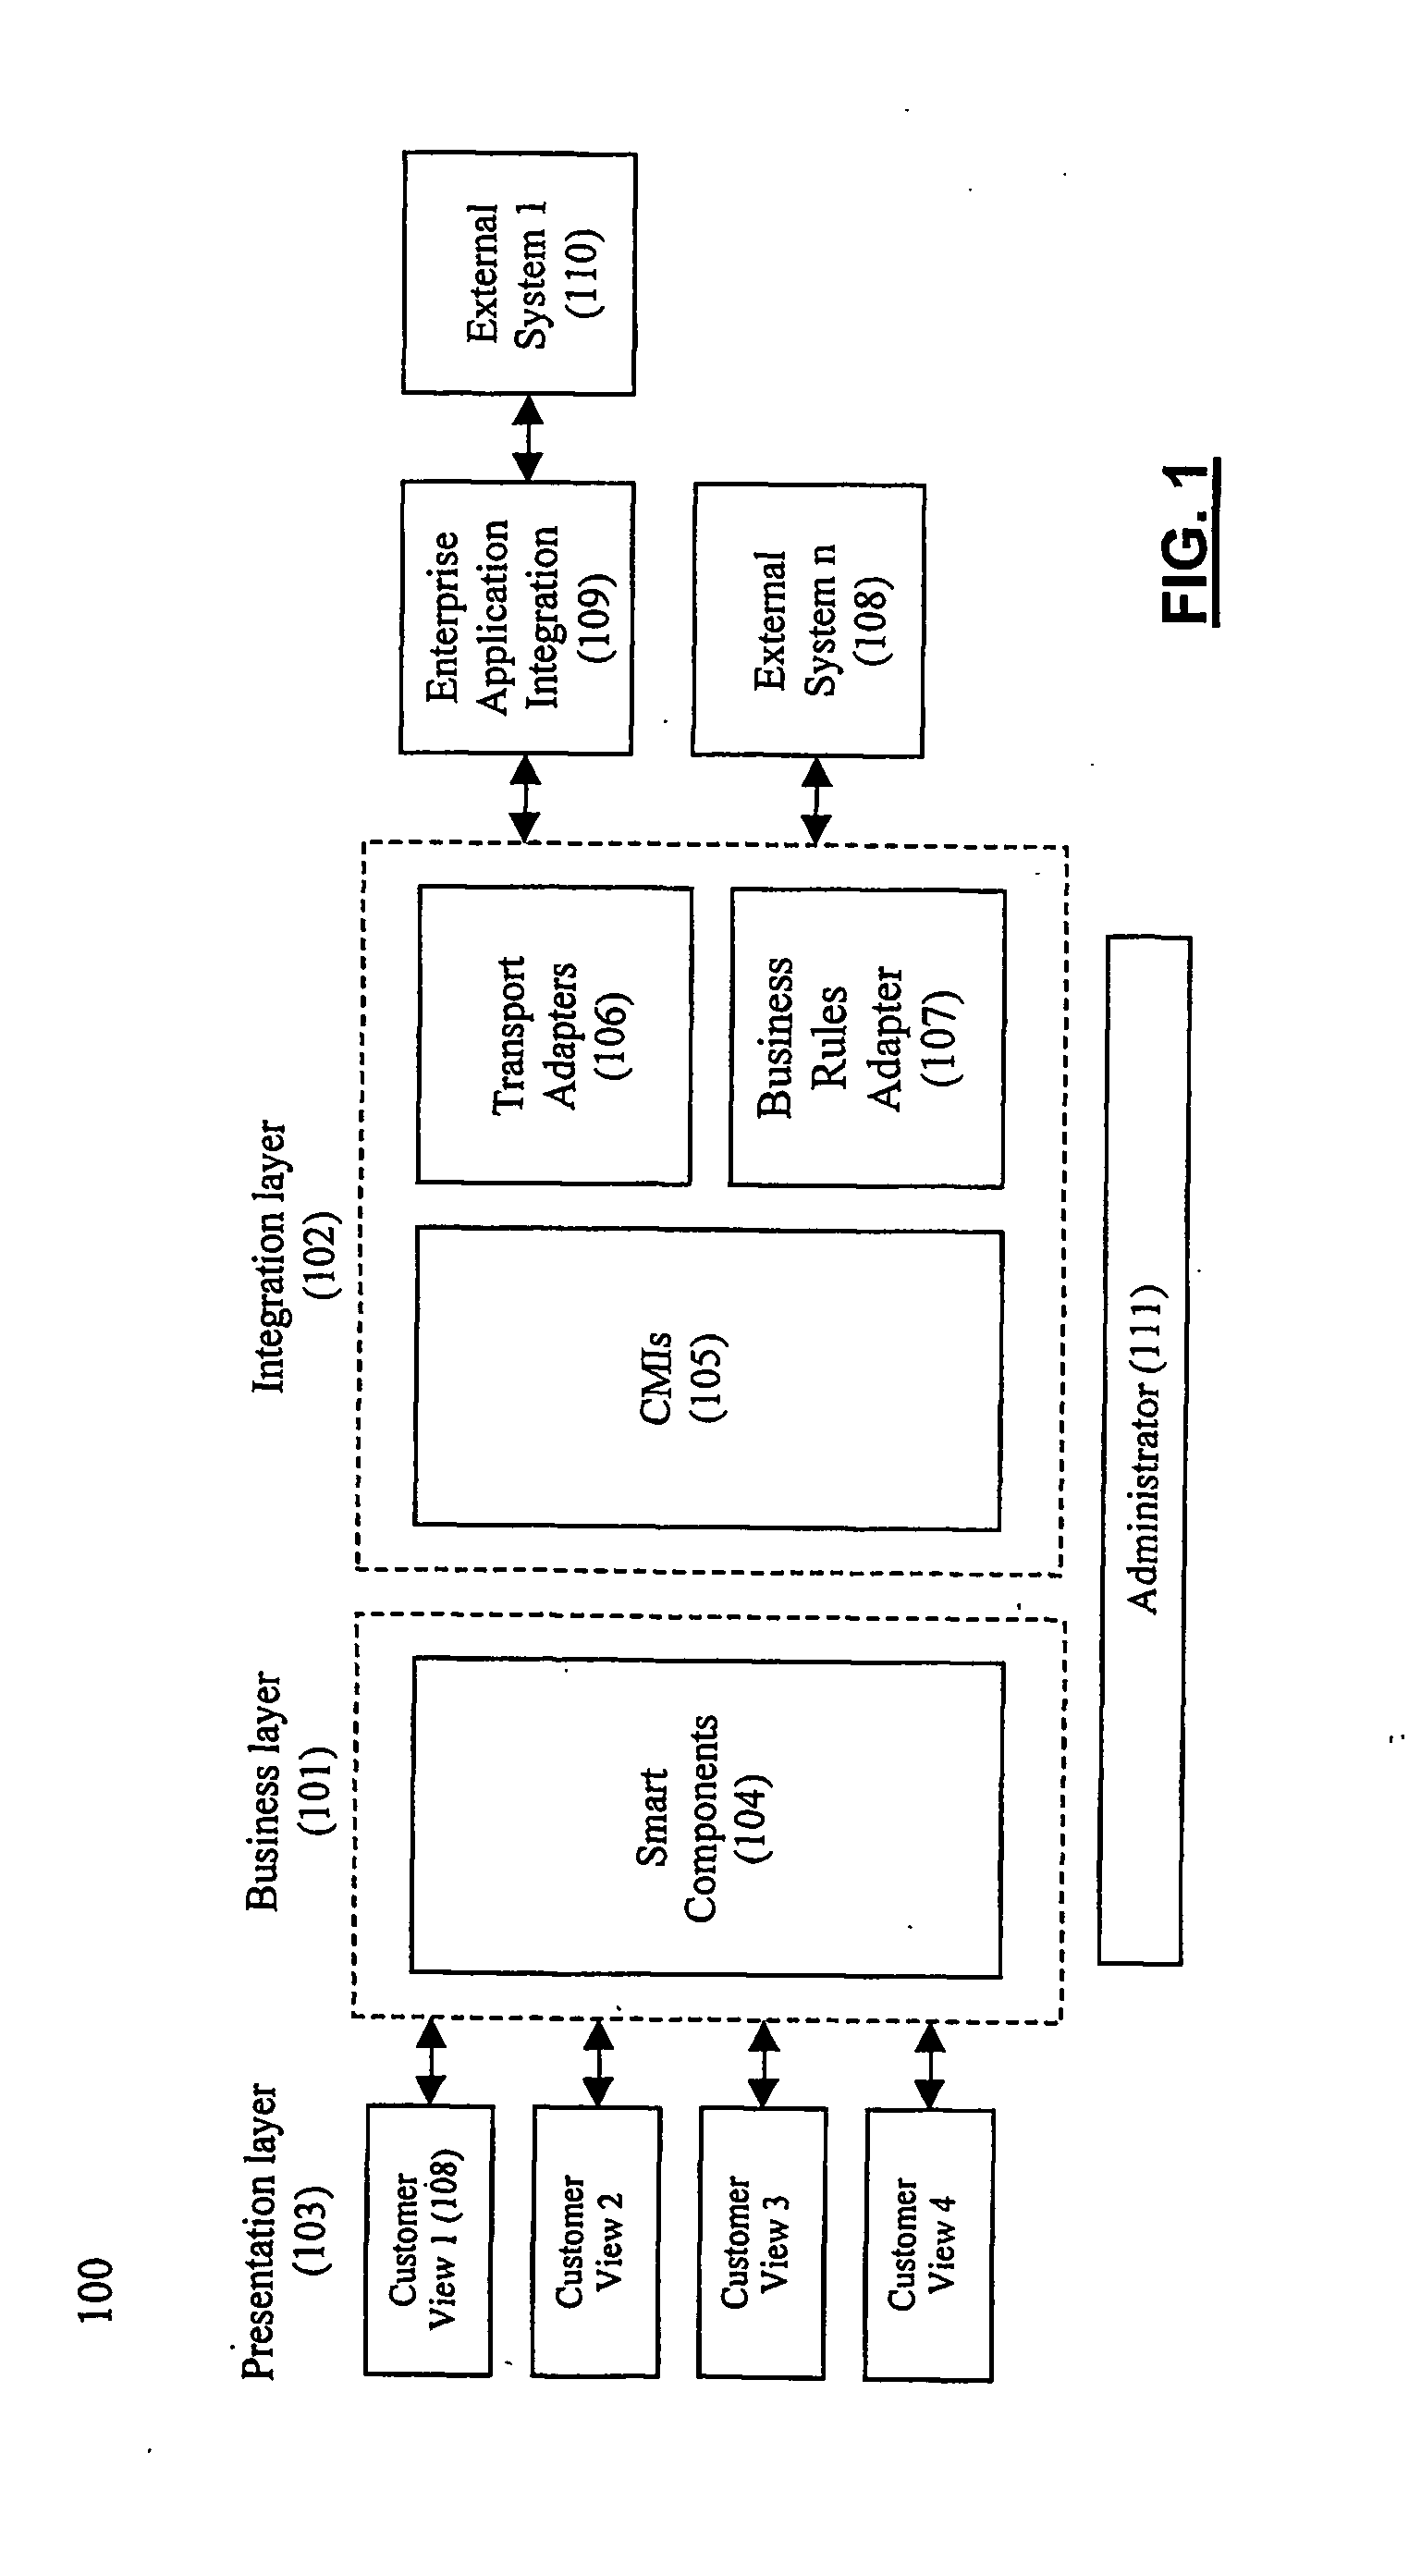 System and method for establishing eletronic business systems for supporting communications servuces commerce